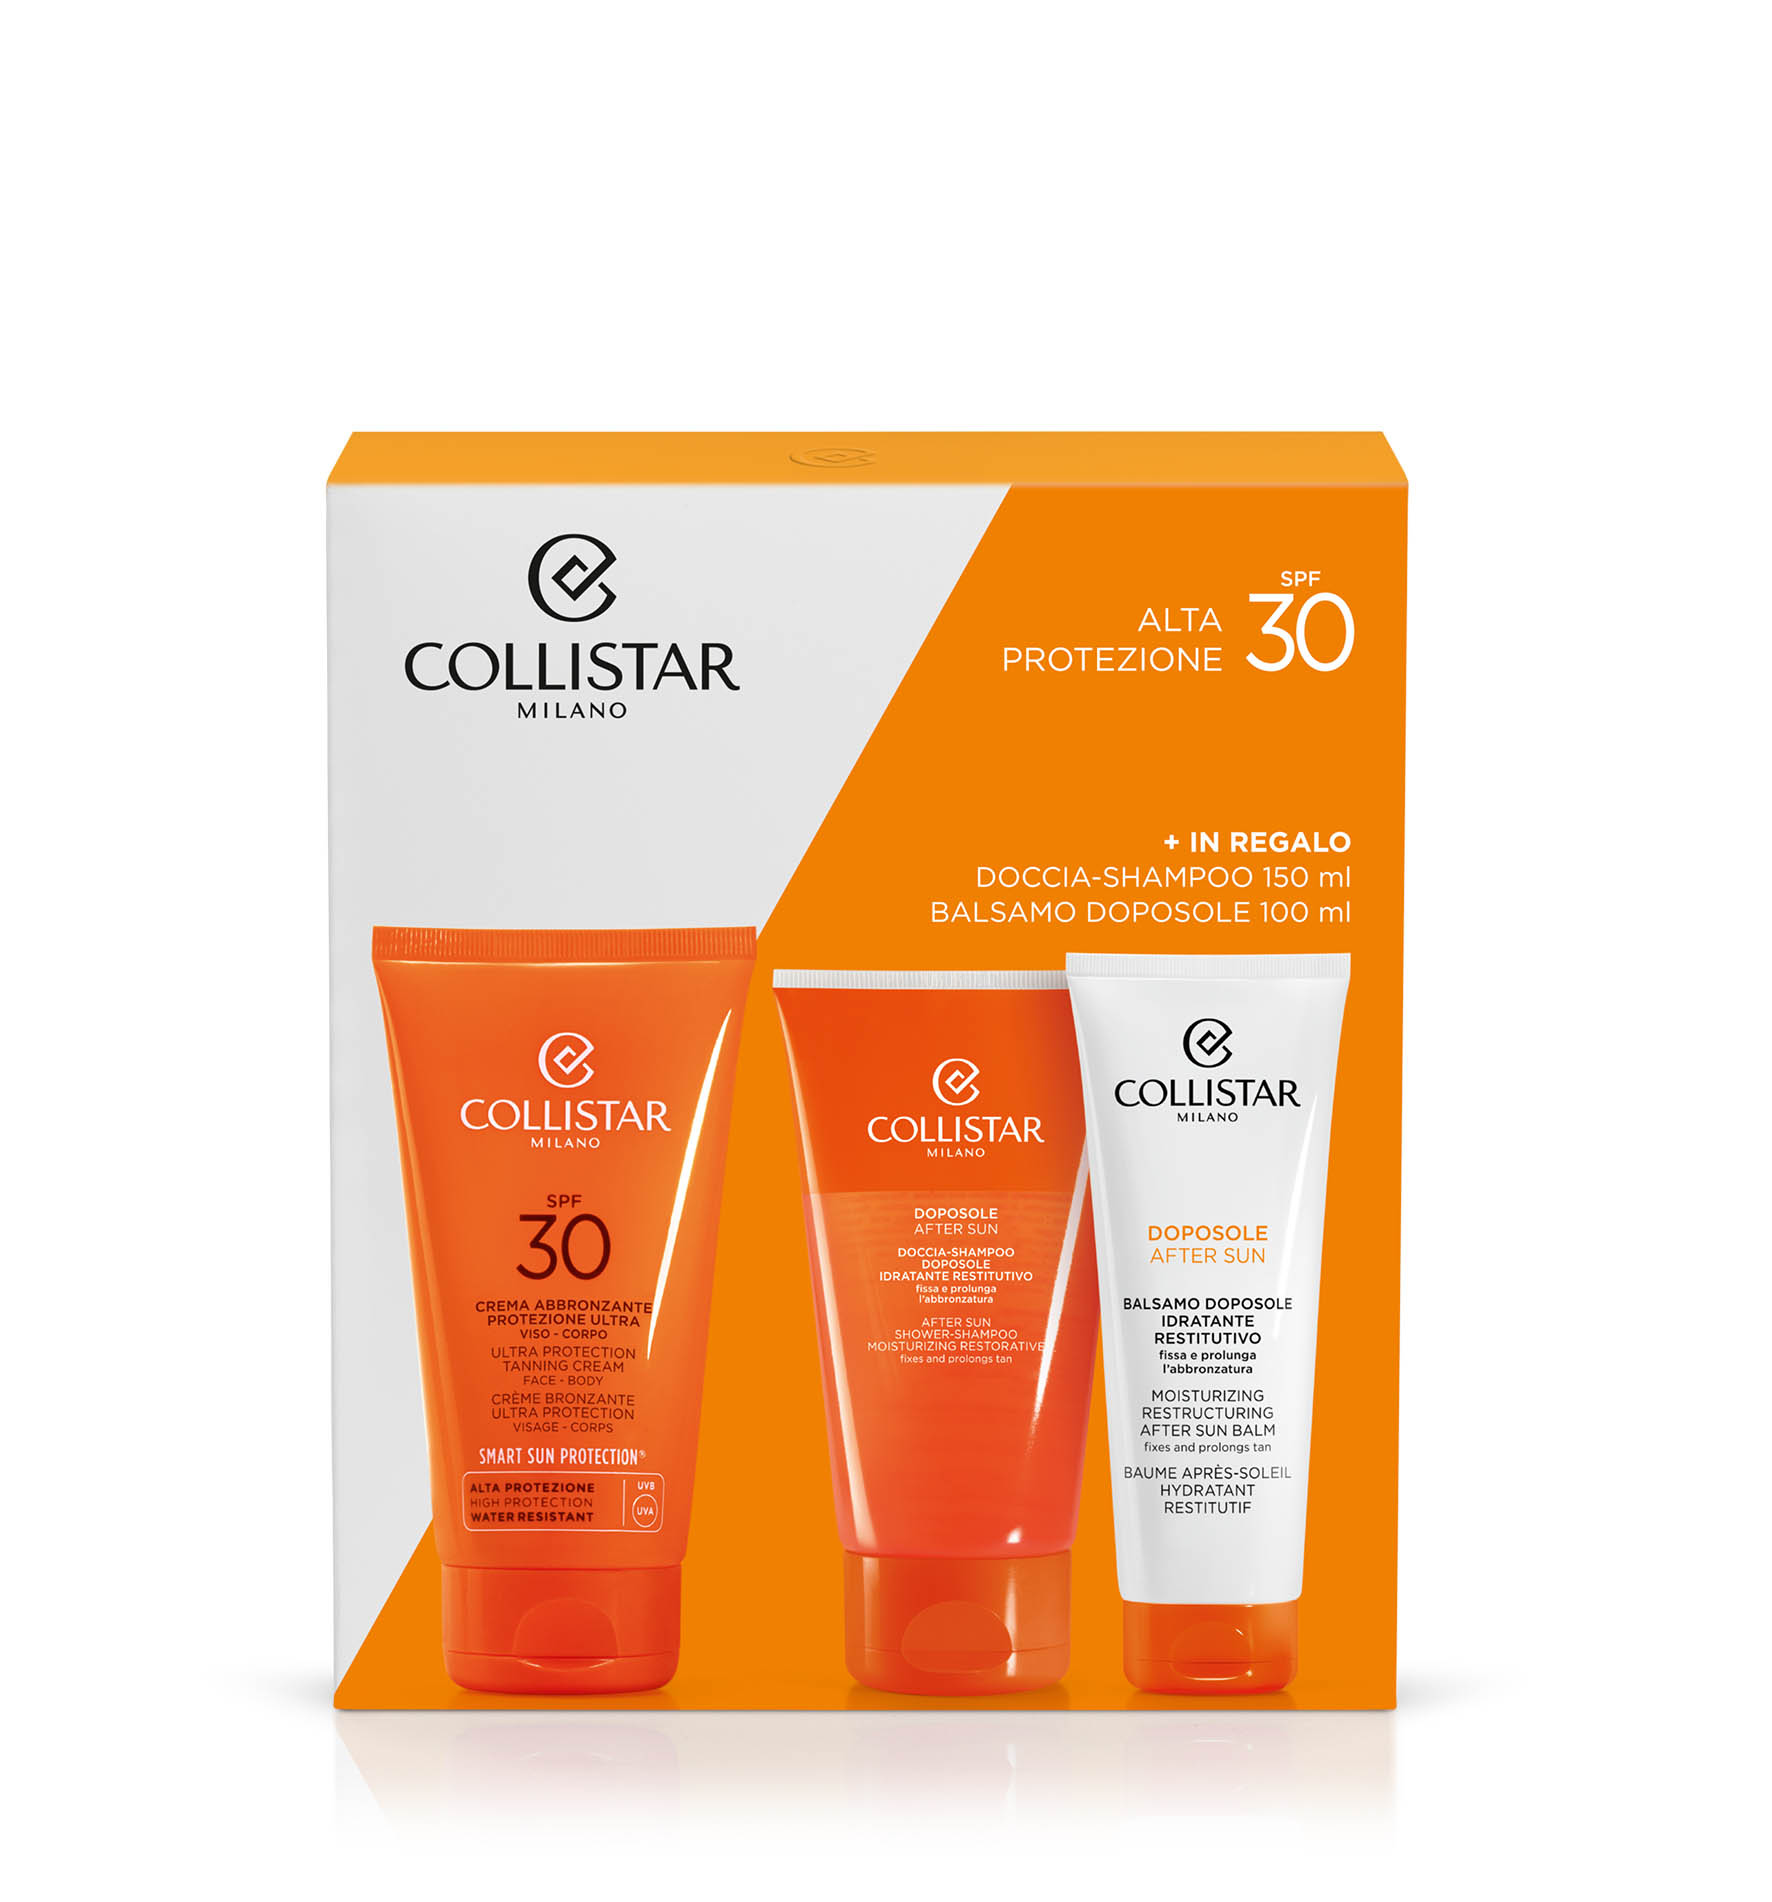 SET ULTRA PROTECTION TANNING CREAM FACE-BODY SPF 30 - New | Collistar - Shop Online Ufficiale